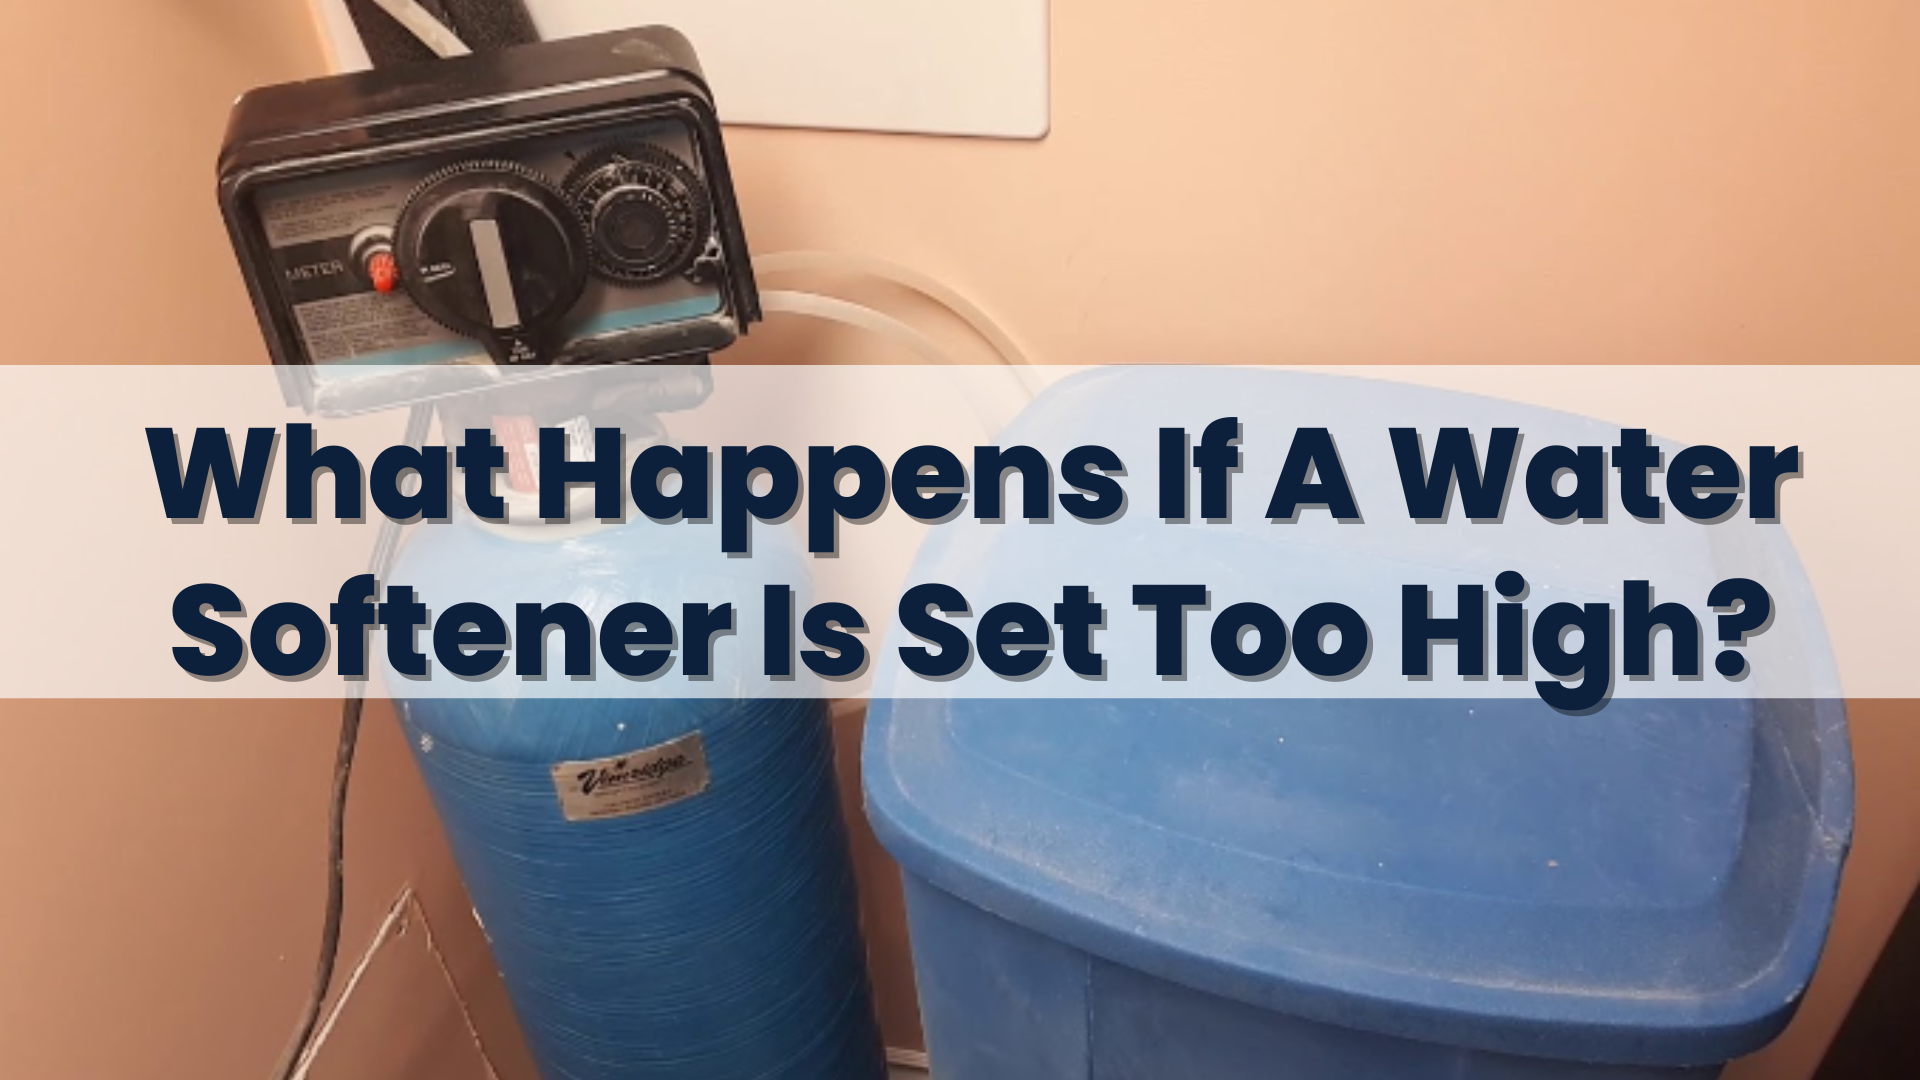 What Happens If A Water Softener Is Set Too High